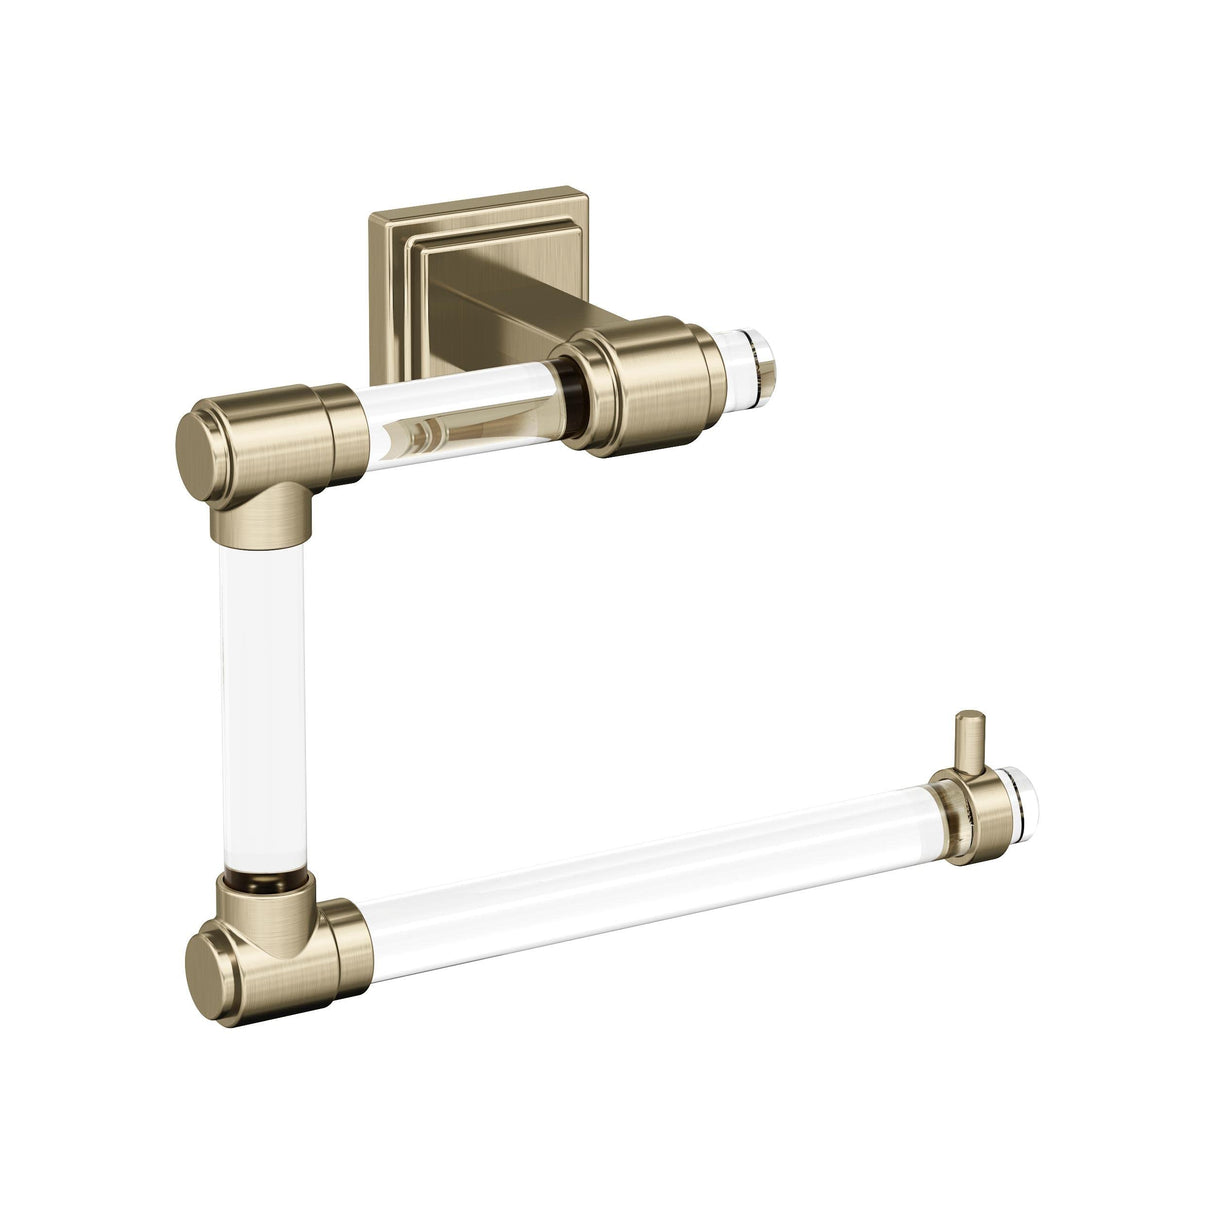 Amerock BH36062CBBZ Clear/Golden Champagne Towel Ring 5-7/16 in (138 mm) Length Towel Holder Glacio Hand Towel Holder for Bathroom Wall Small Kitchen Towel Holder Bath Accessories